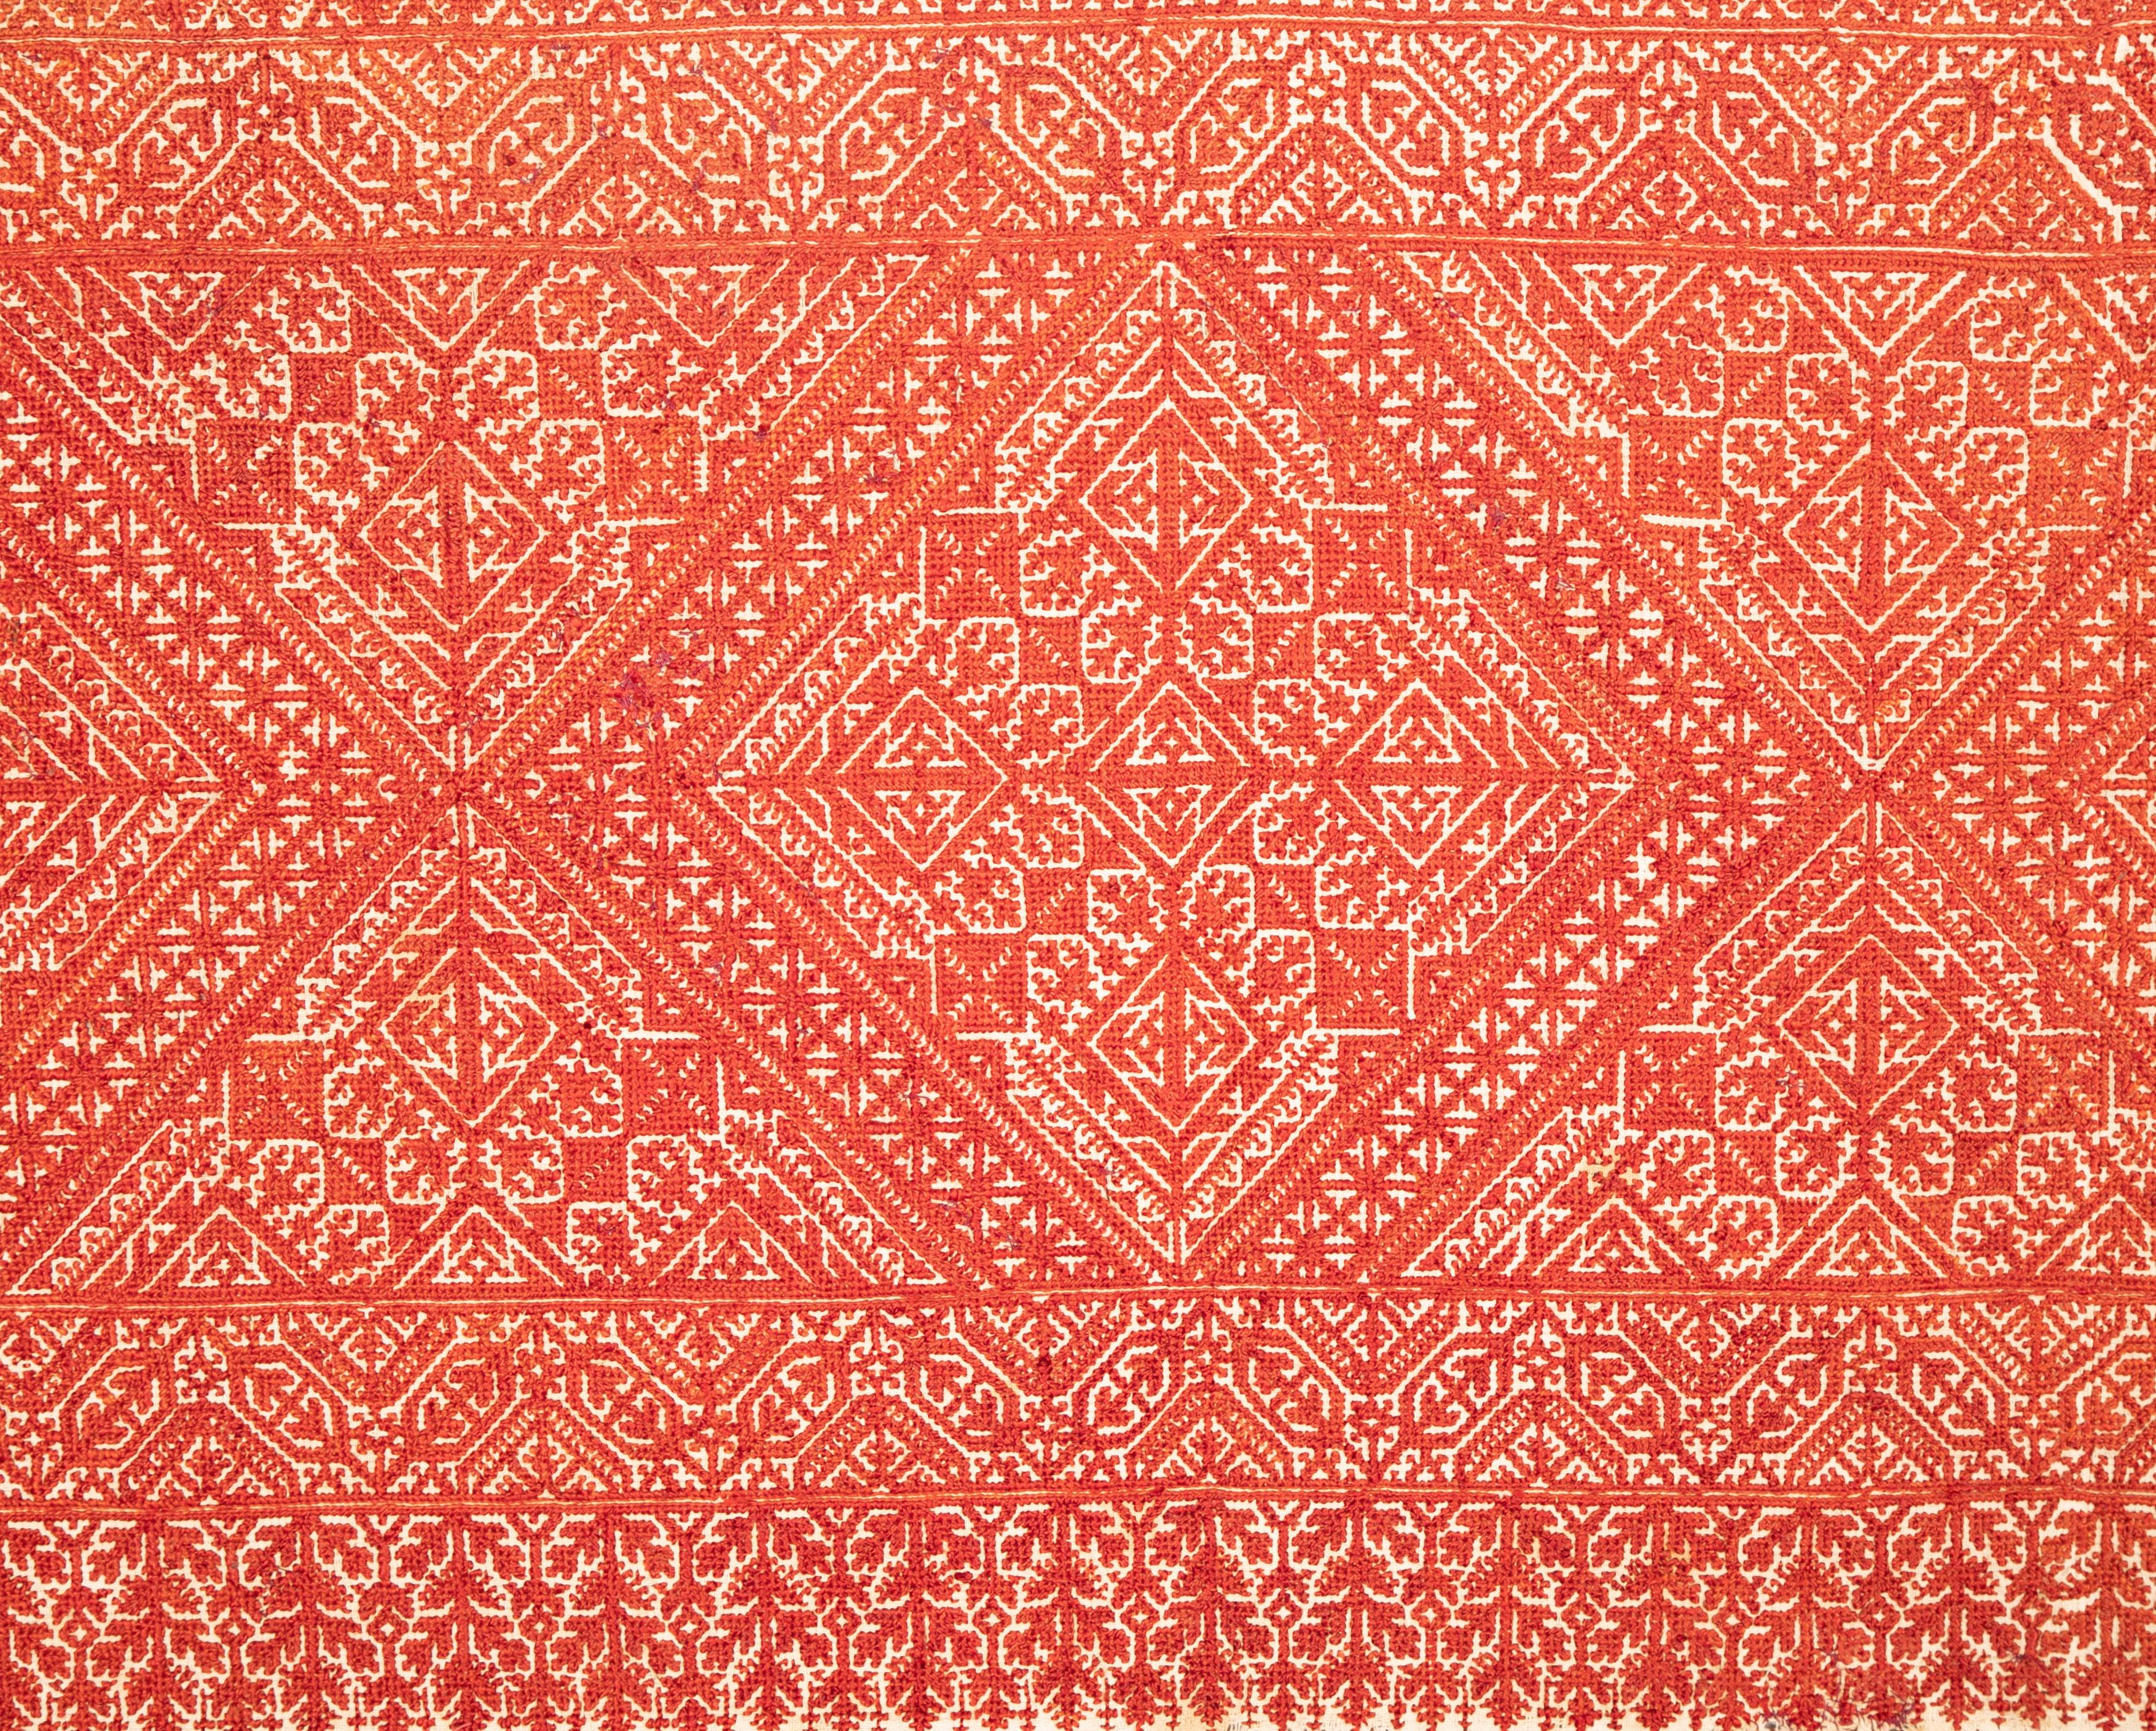 Suzani Moroccan Fez Embroidery, Early 20th Century